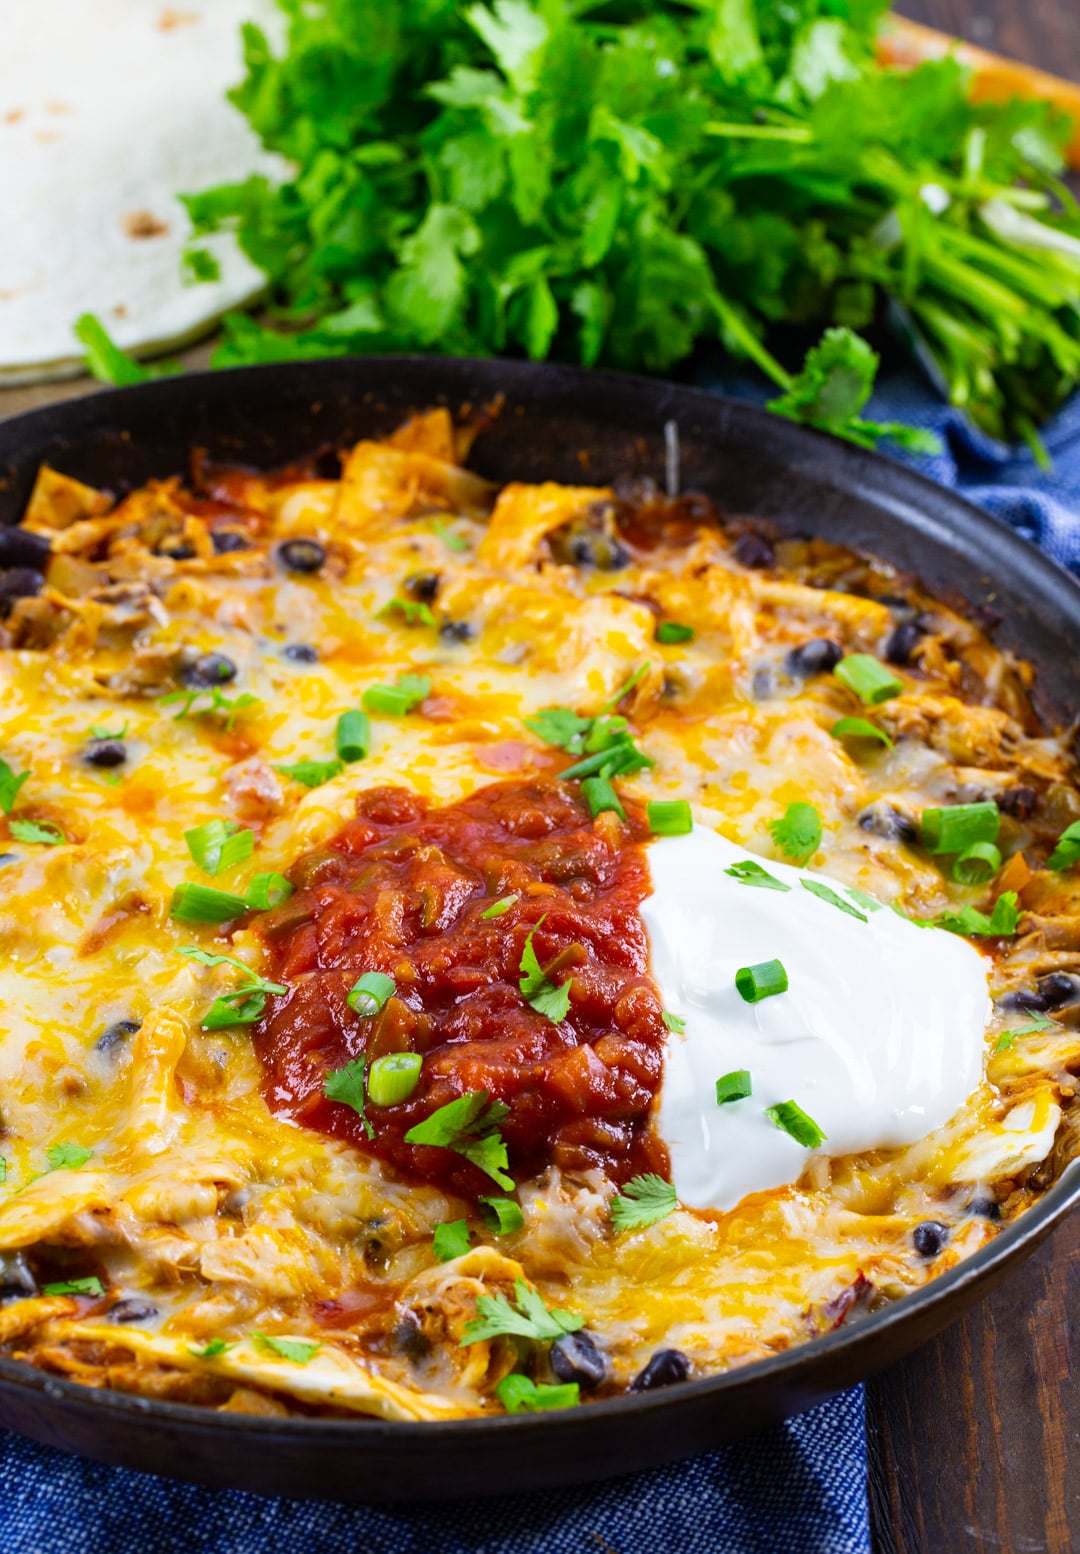 Chipotle Chicken Enchilada Skillet topped with sour cream and salsa.